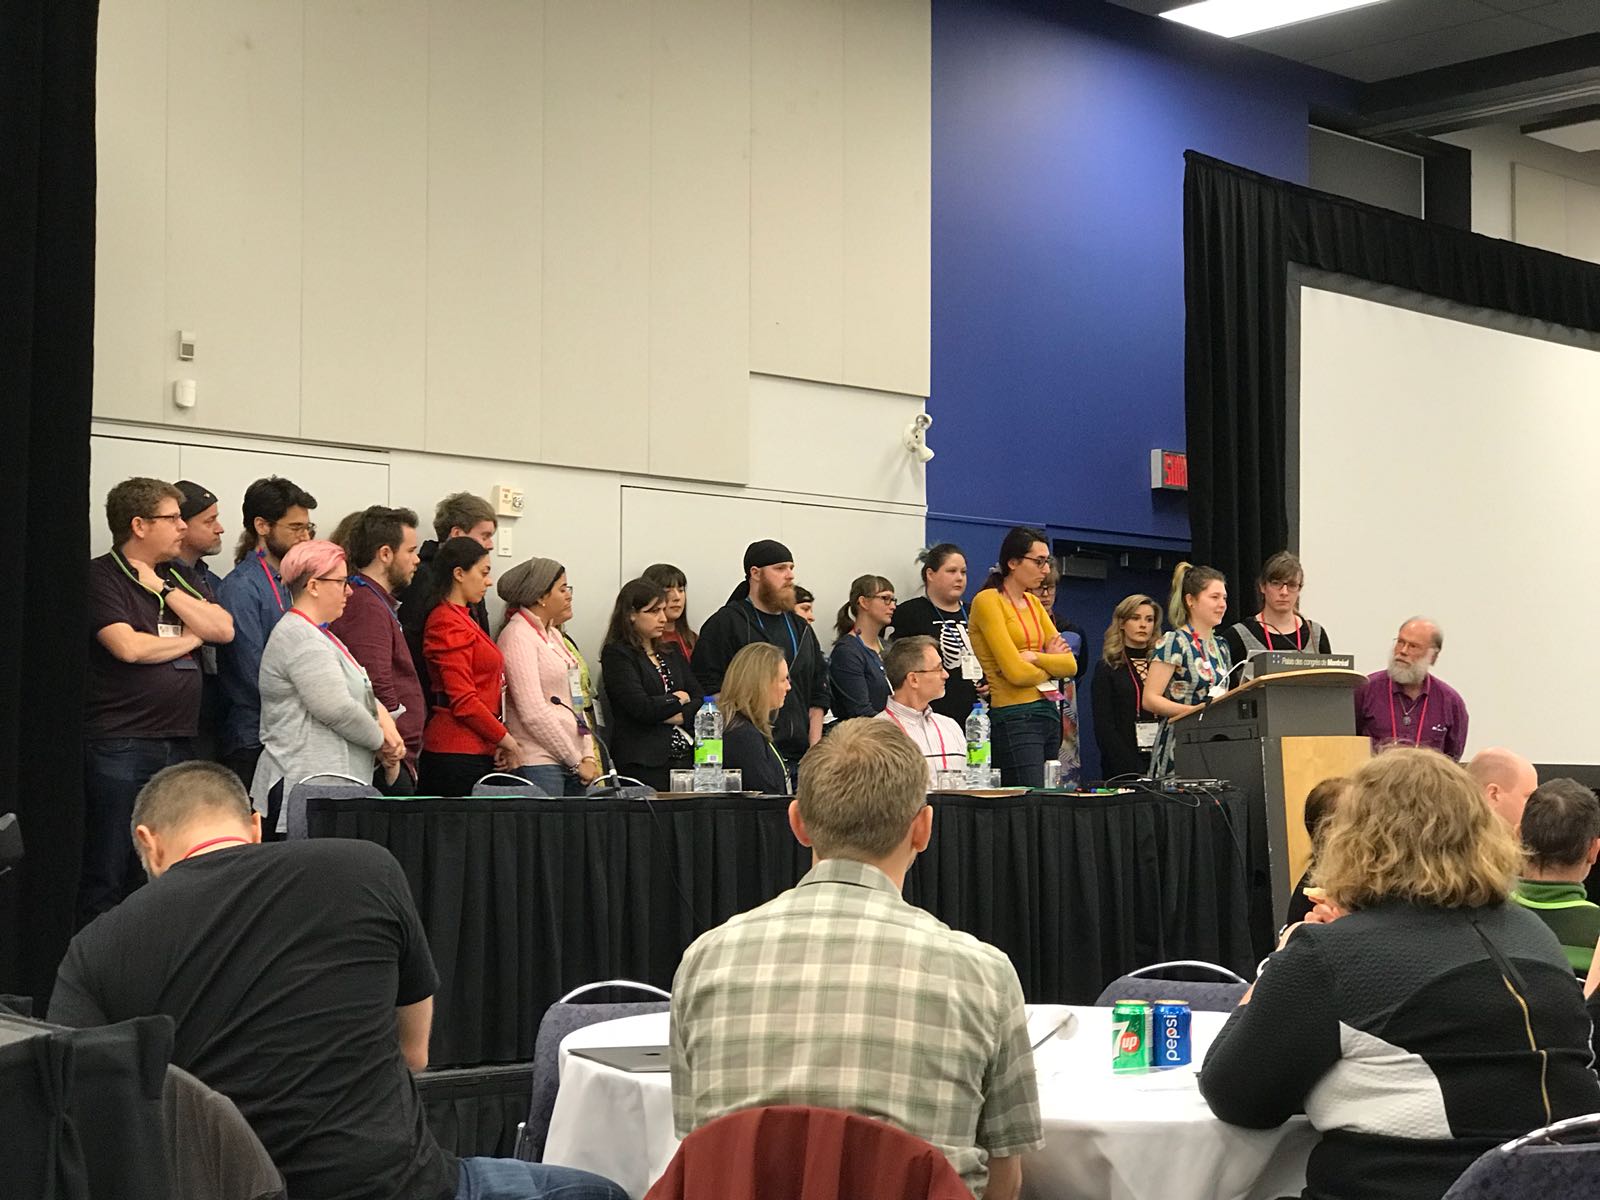 CHI 2018 – an open letter to the CHI community